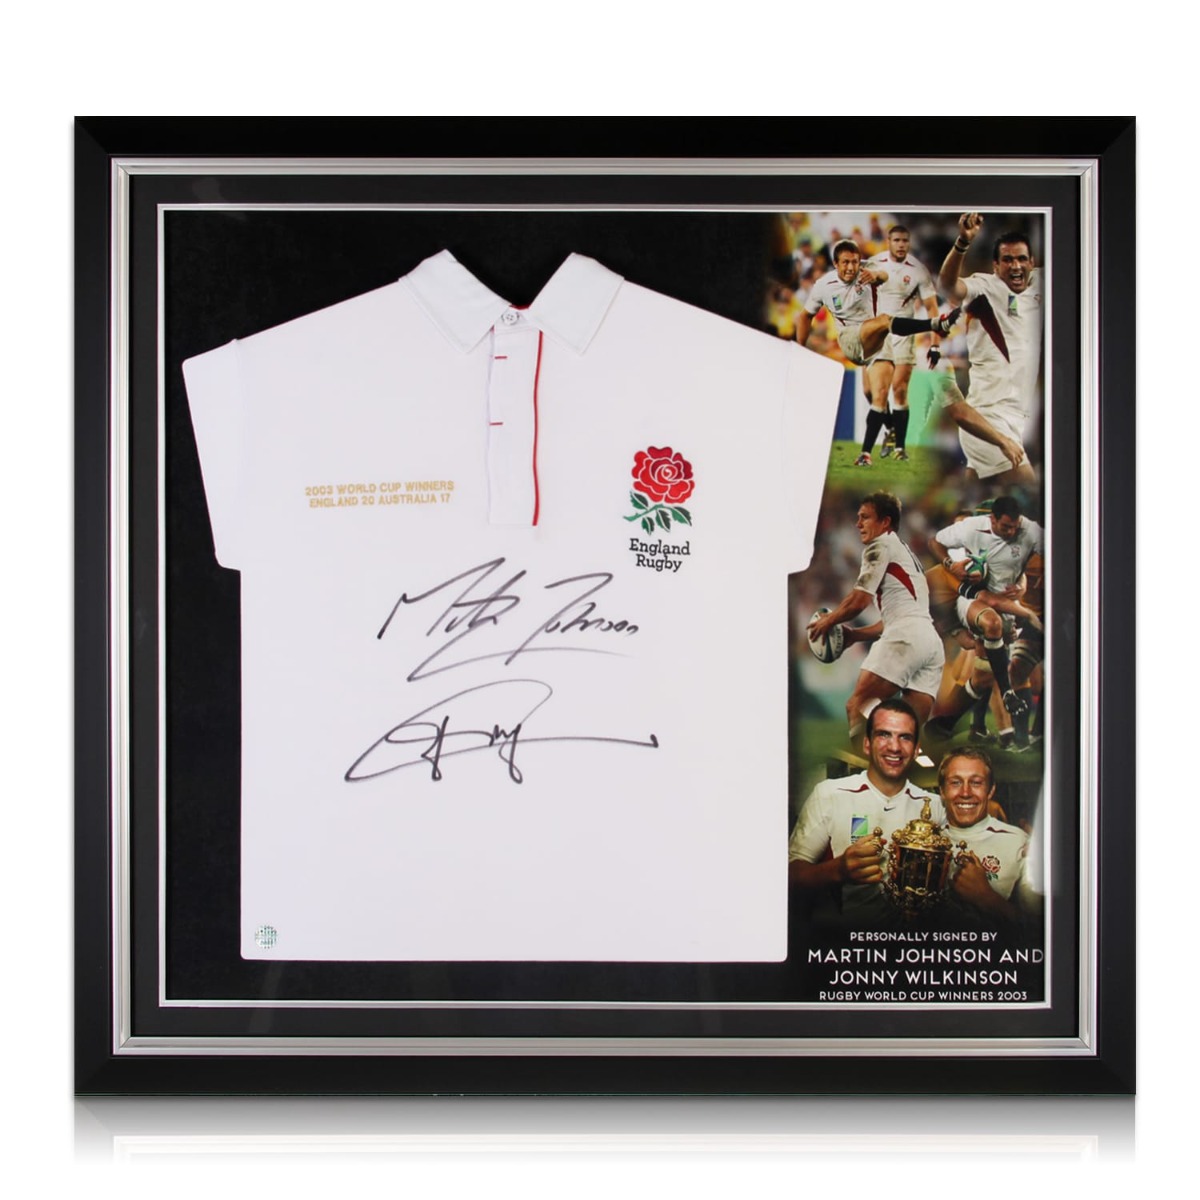 JONNY WILKINSON TOULON RUGBY SIGNED PHOTO PRINT POSTER 